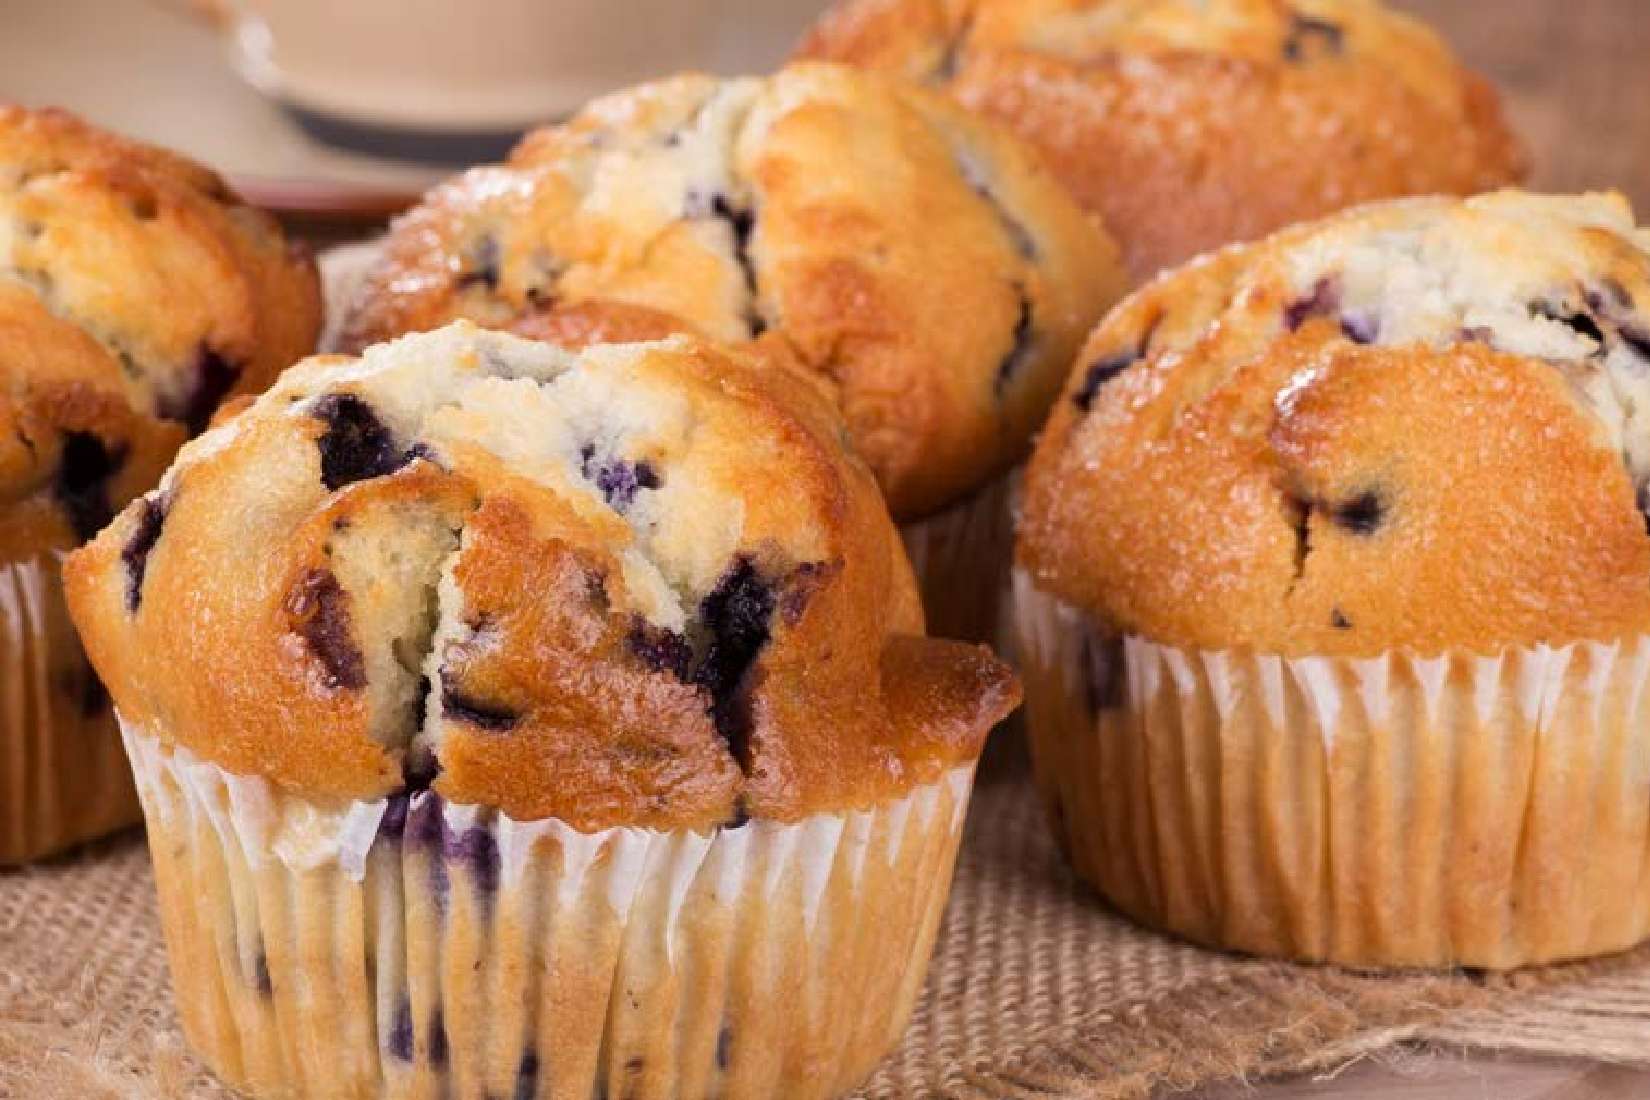 Heritage Ovens® Fully Baked, Thaw-and-Serve Muffins, and Heritage Ovens® Individually Wrapped, Thaw-and-Serve Muffins